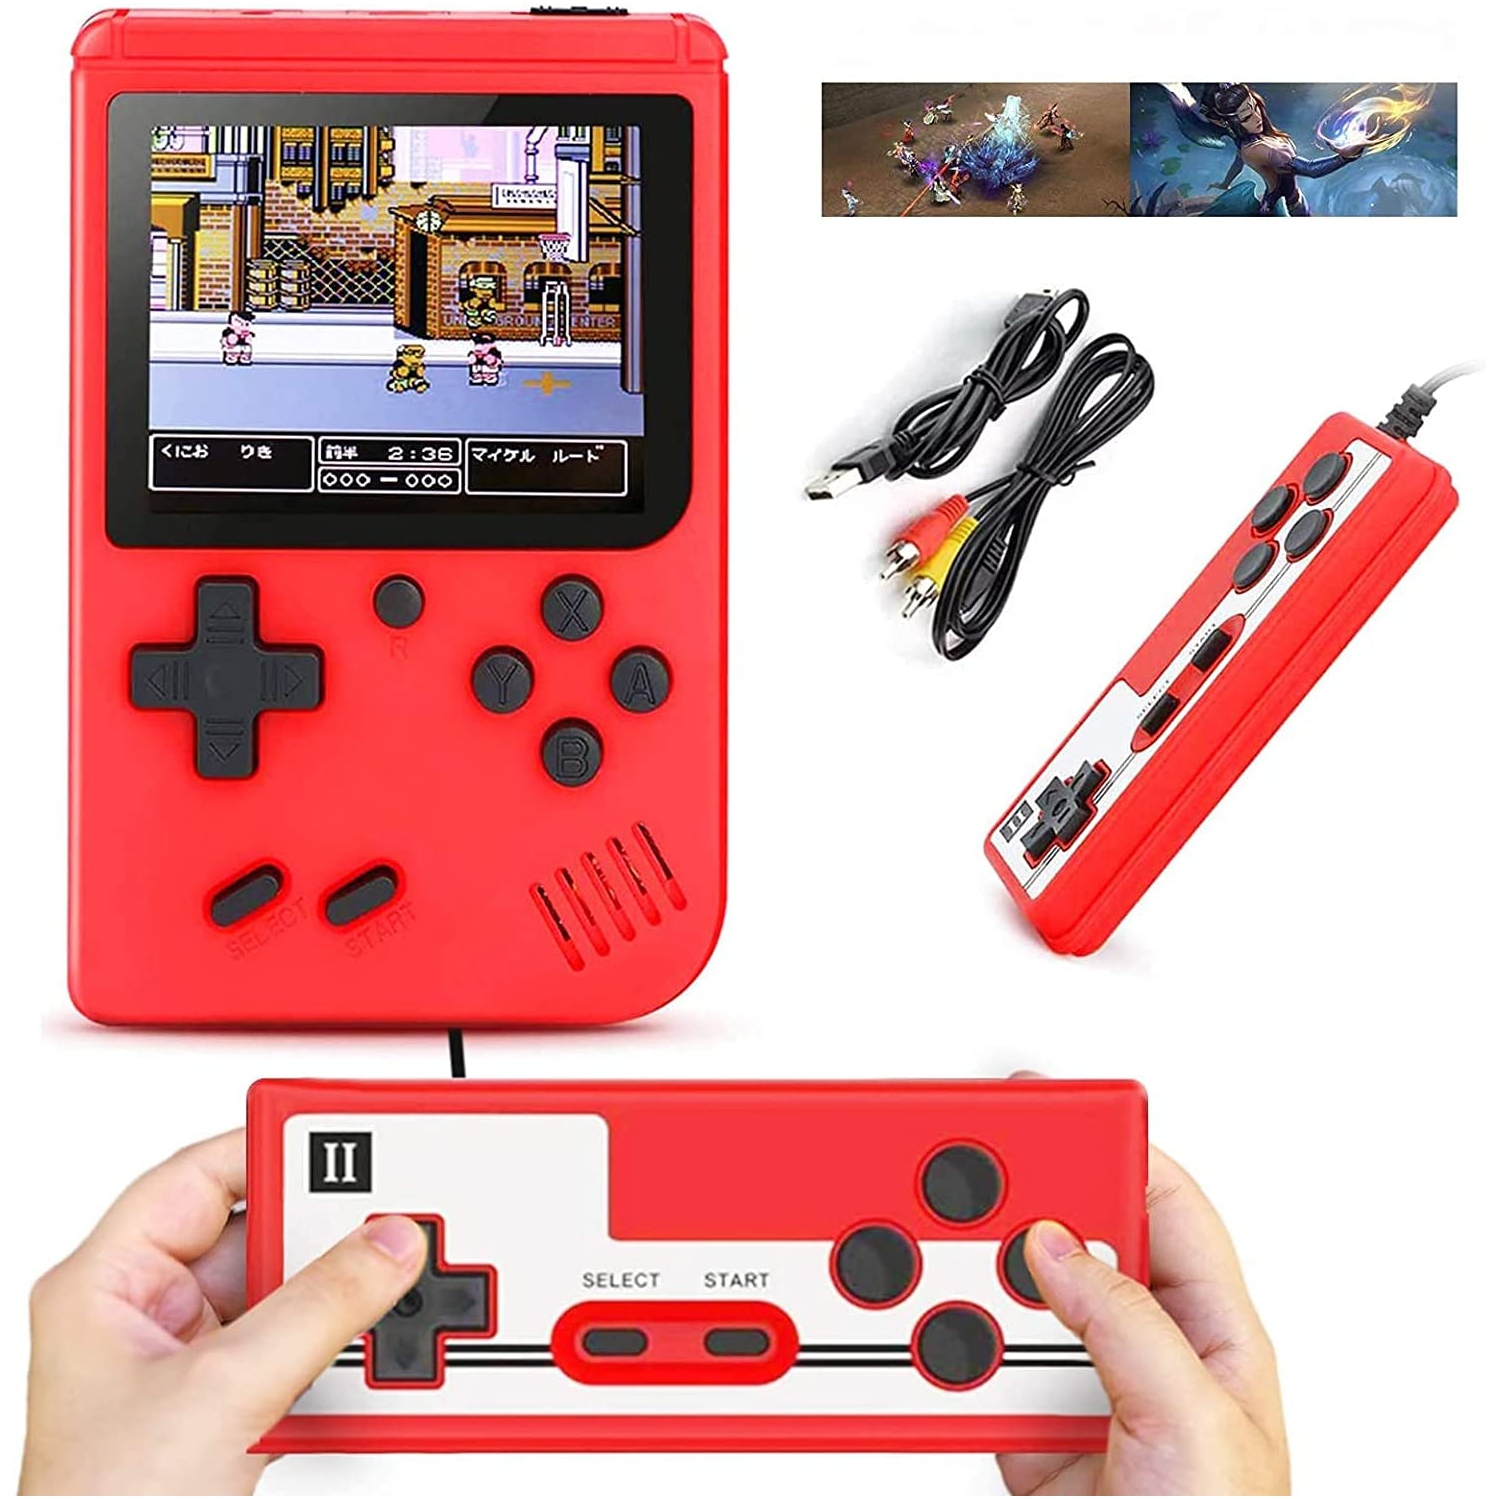 ULTREND Retro Handheld Game Console For Children with 400 Classical FC Games, 3.0-Inch Screen and 1020mAh Rechargeable Battery Support for TV Connection and Two Players (Red)